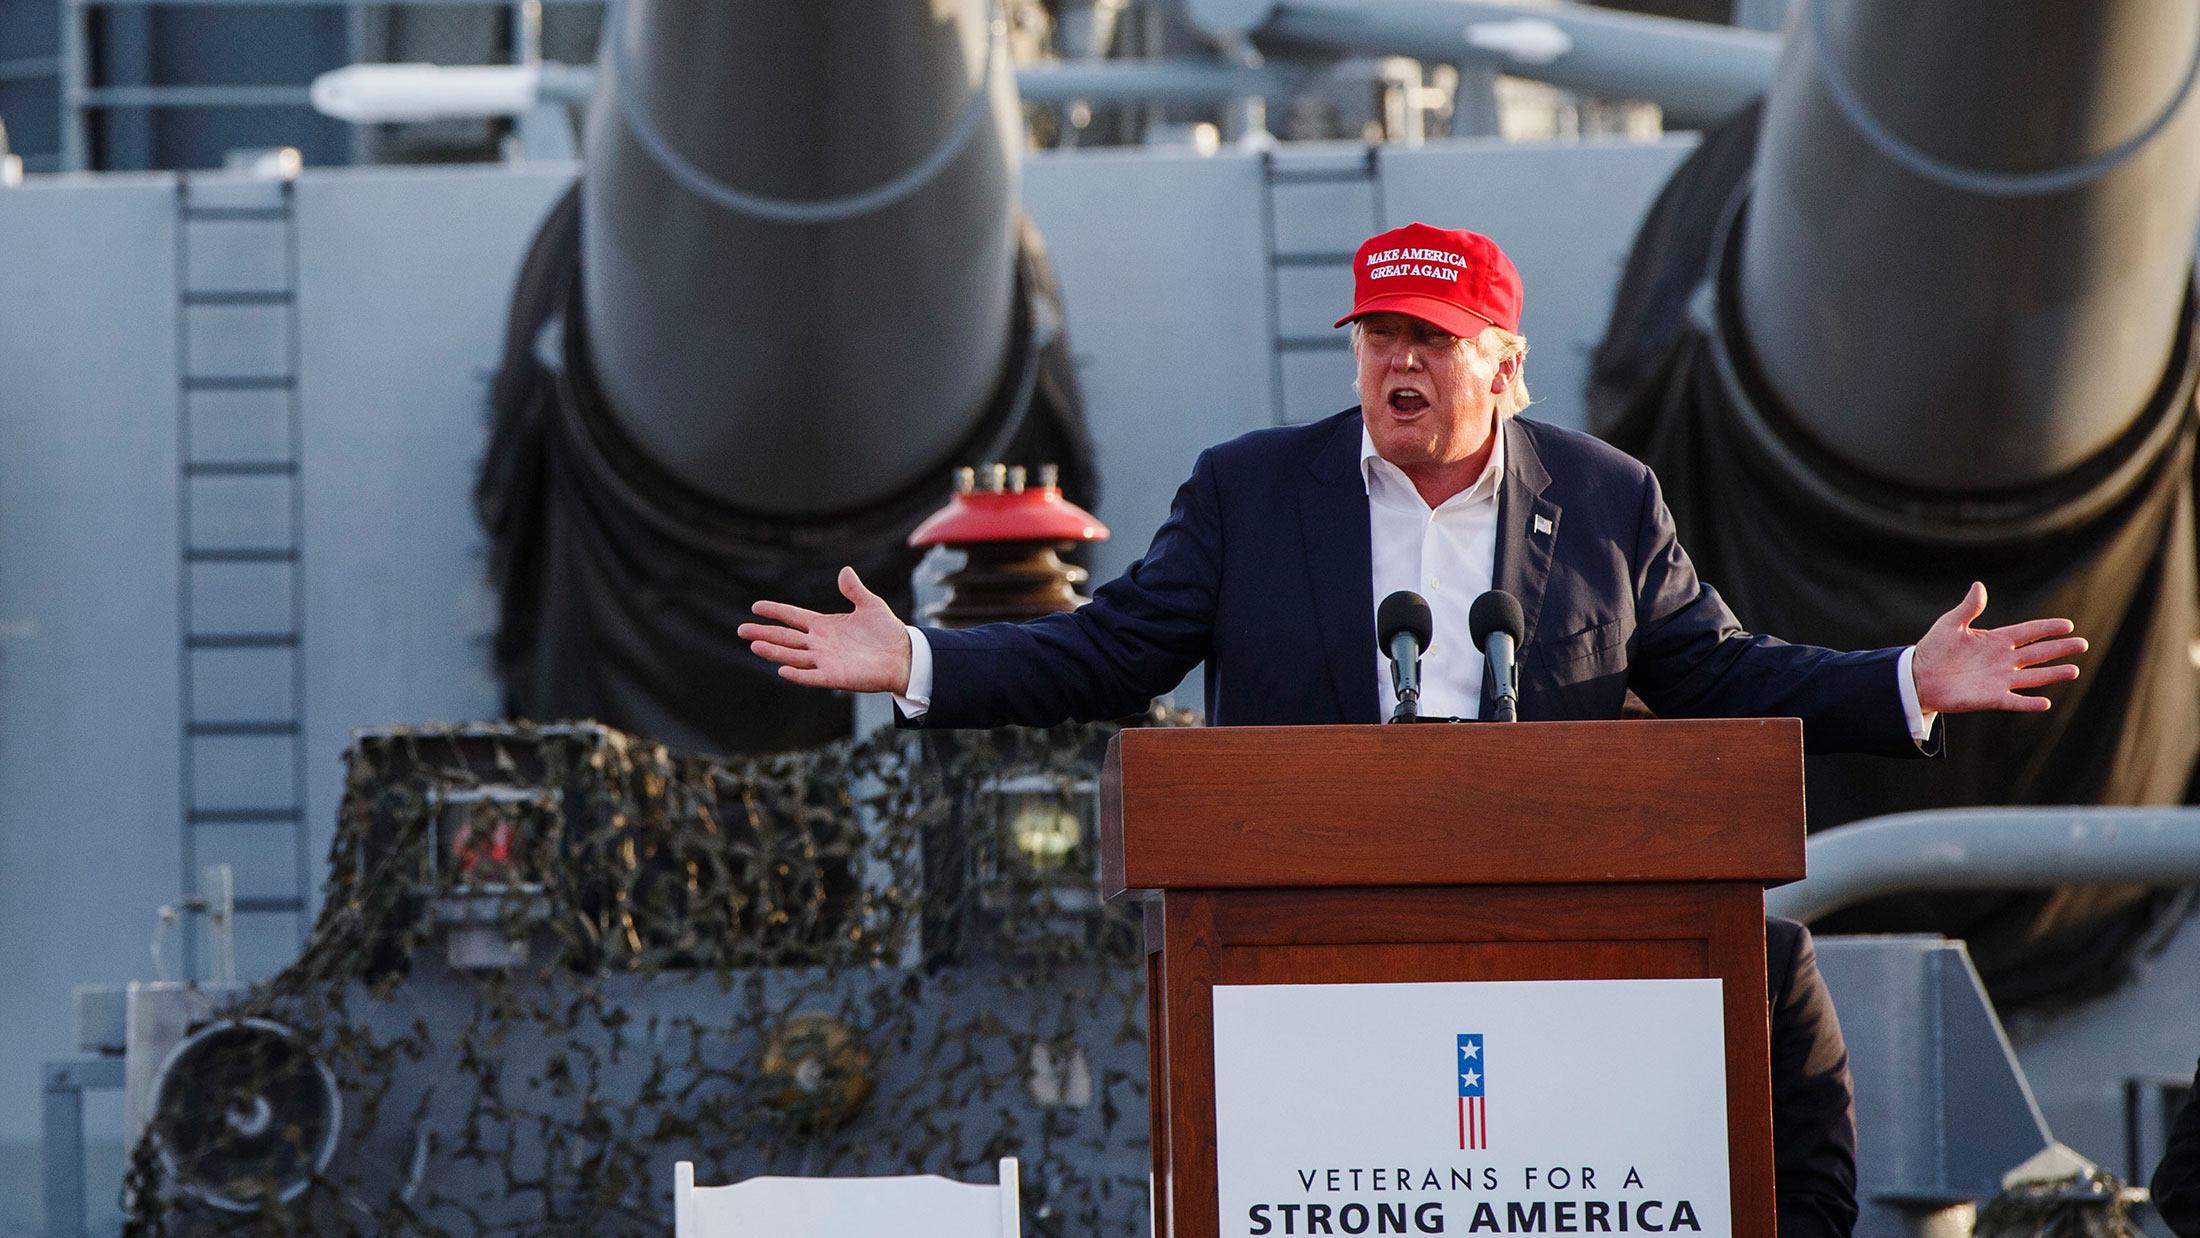 Donald Trump, president and chief executive officer of Trump Organization Inc. and 2016 Republican presidential candidate, speaks during a rally aboard the Battleship USS Iowa in San Pedro, California, on Sept. 15, 2015.
